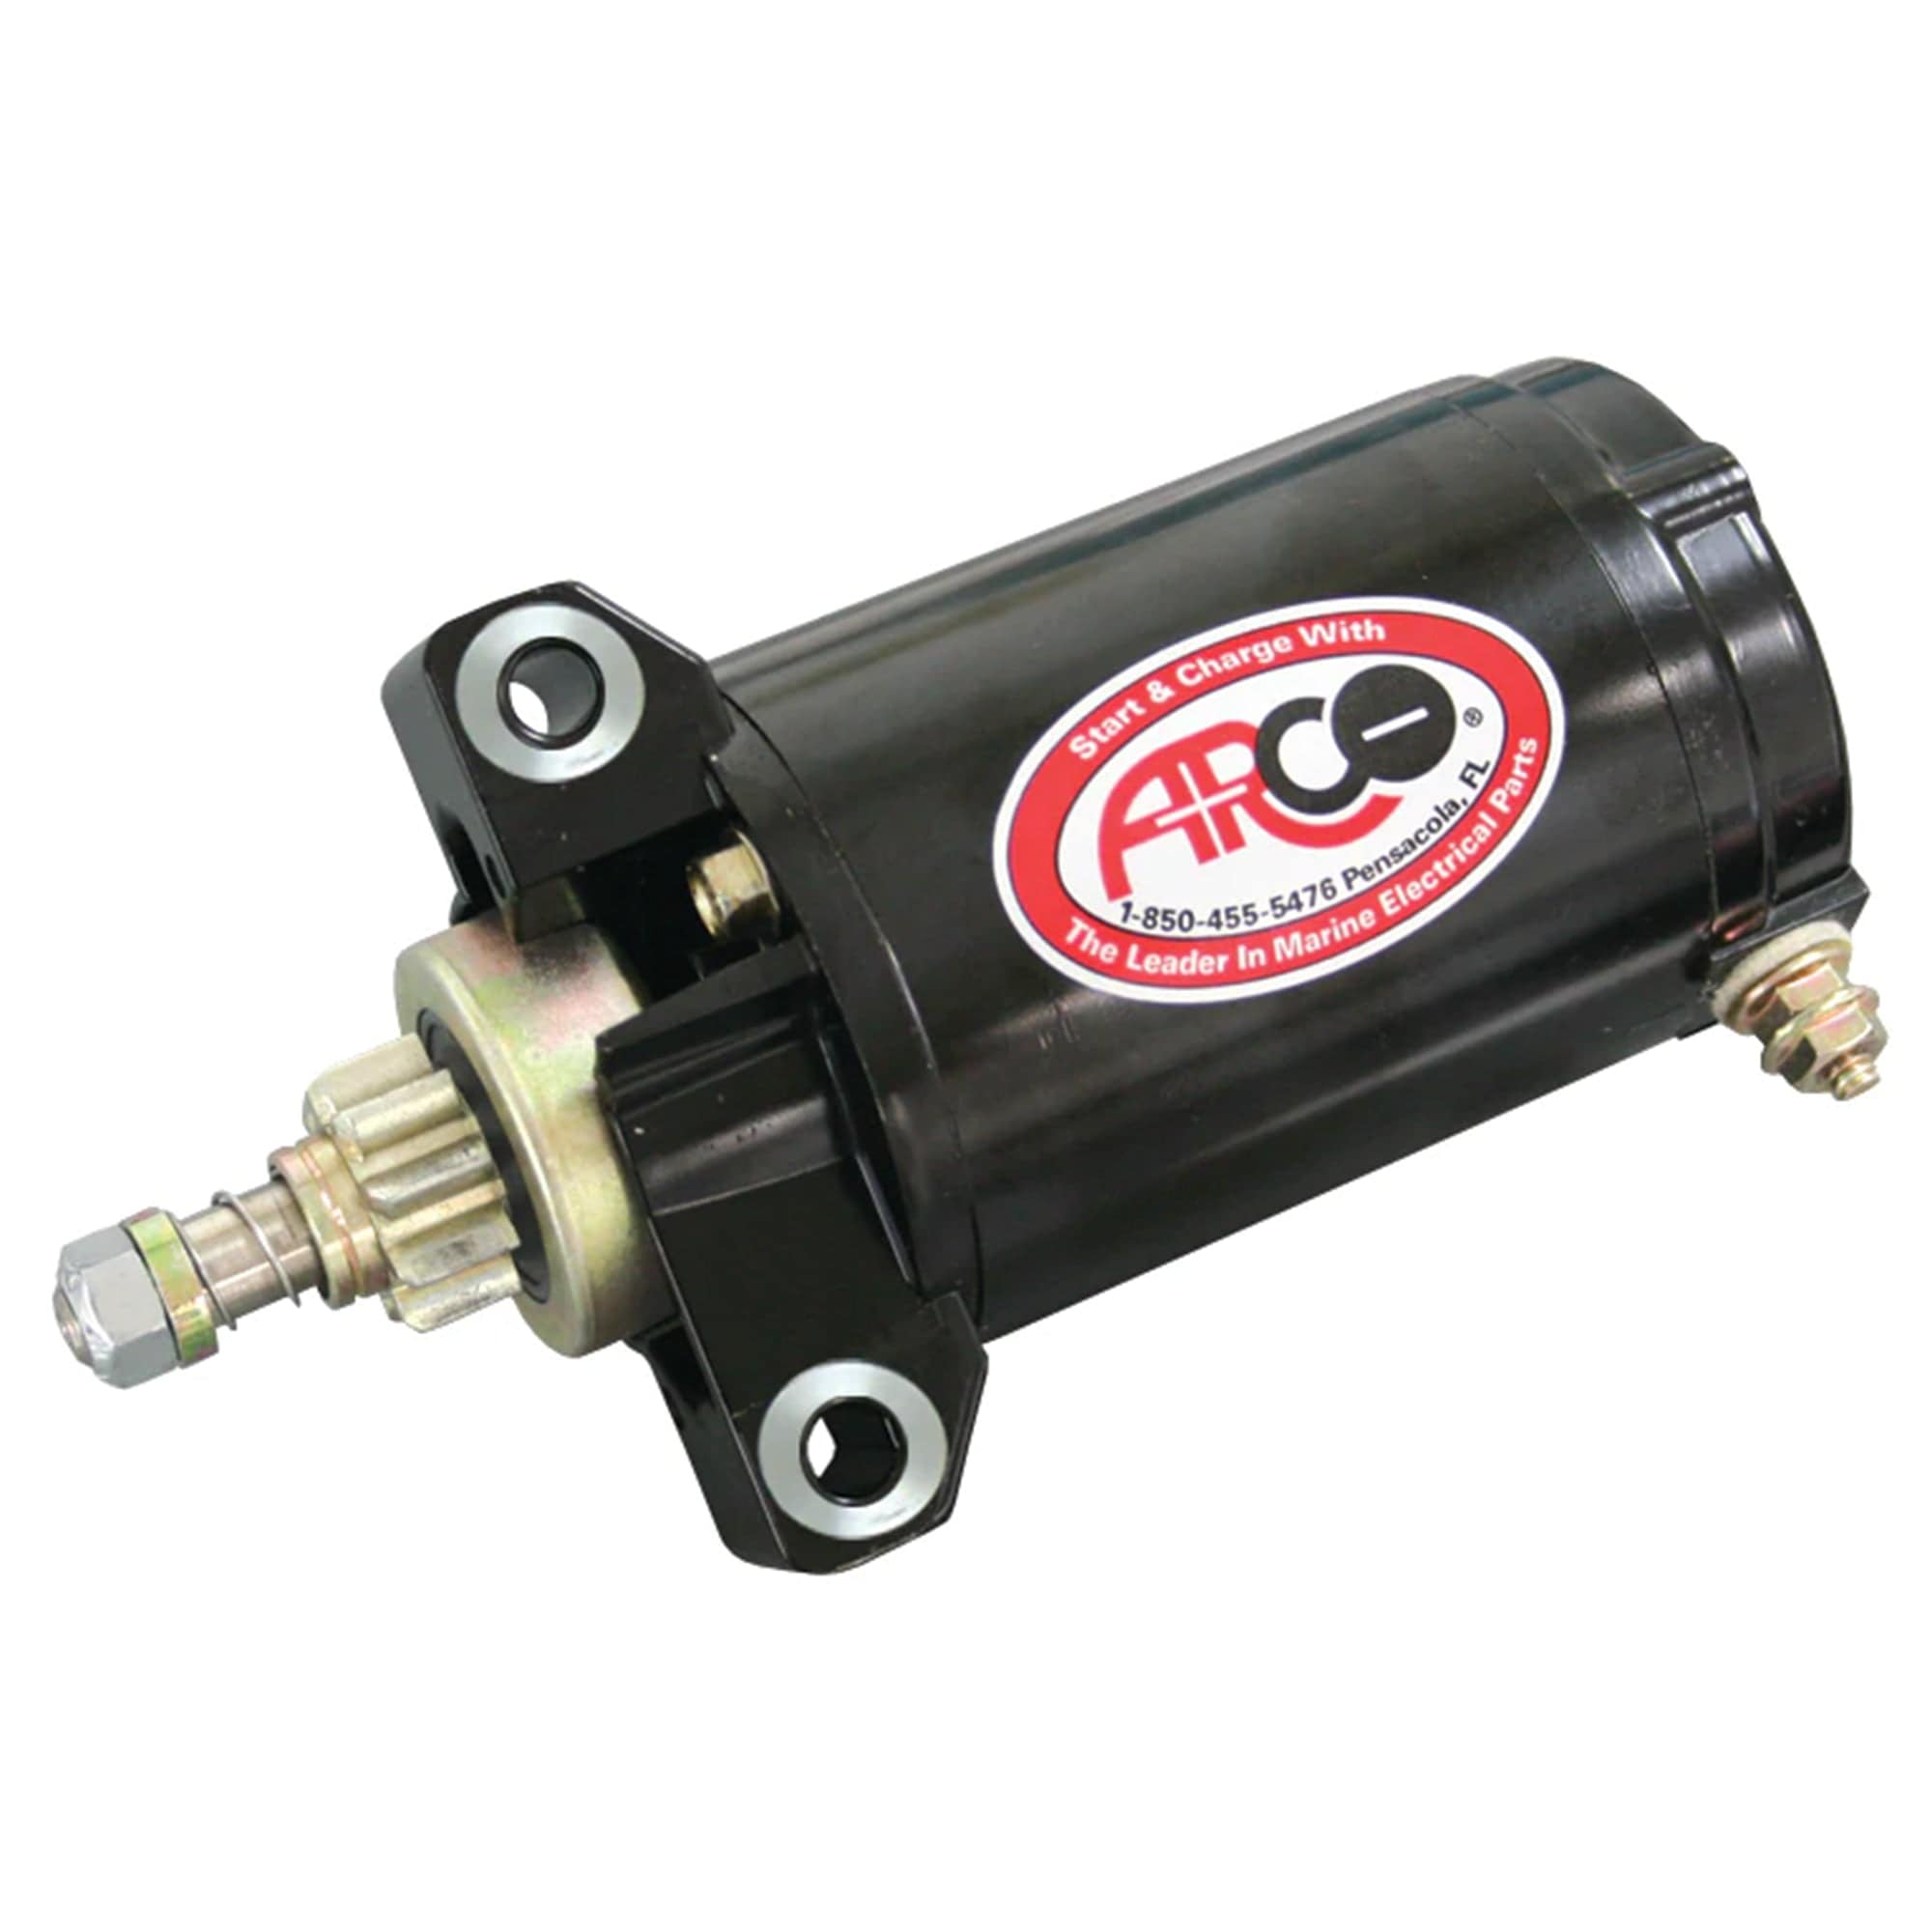 ARCO NEW Original Equipment Quality Replacement Outboard Starter for Mercury and Yamaha - 65W-81800, 893886T, 859169T, 888151T, 830308